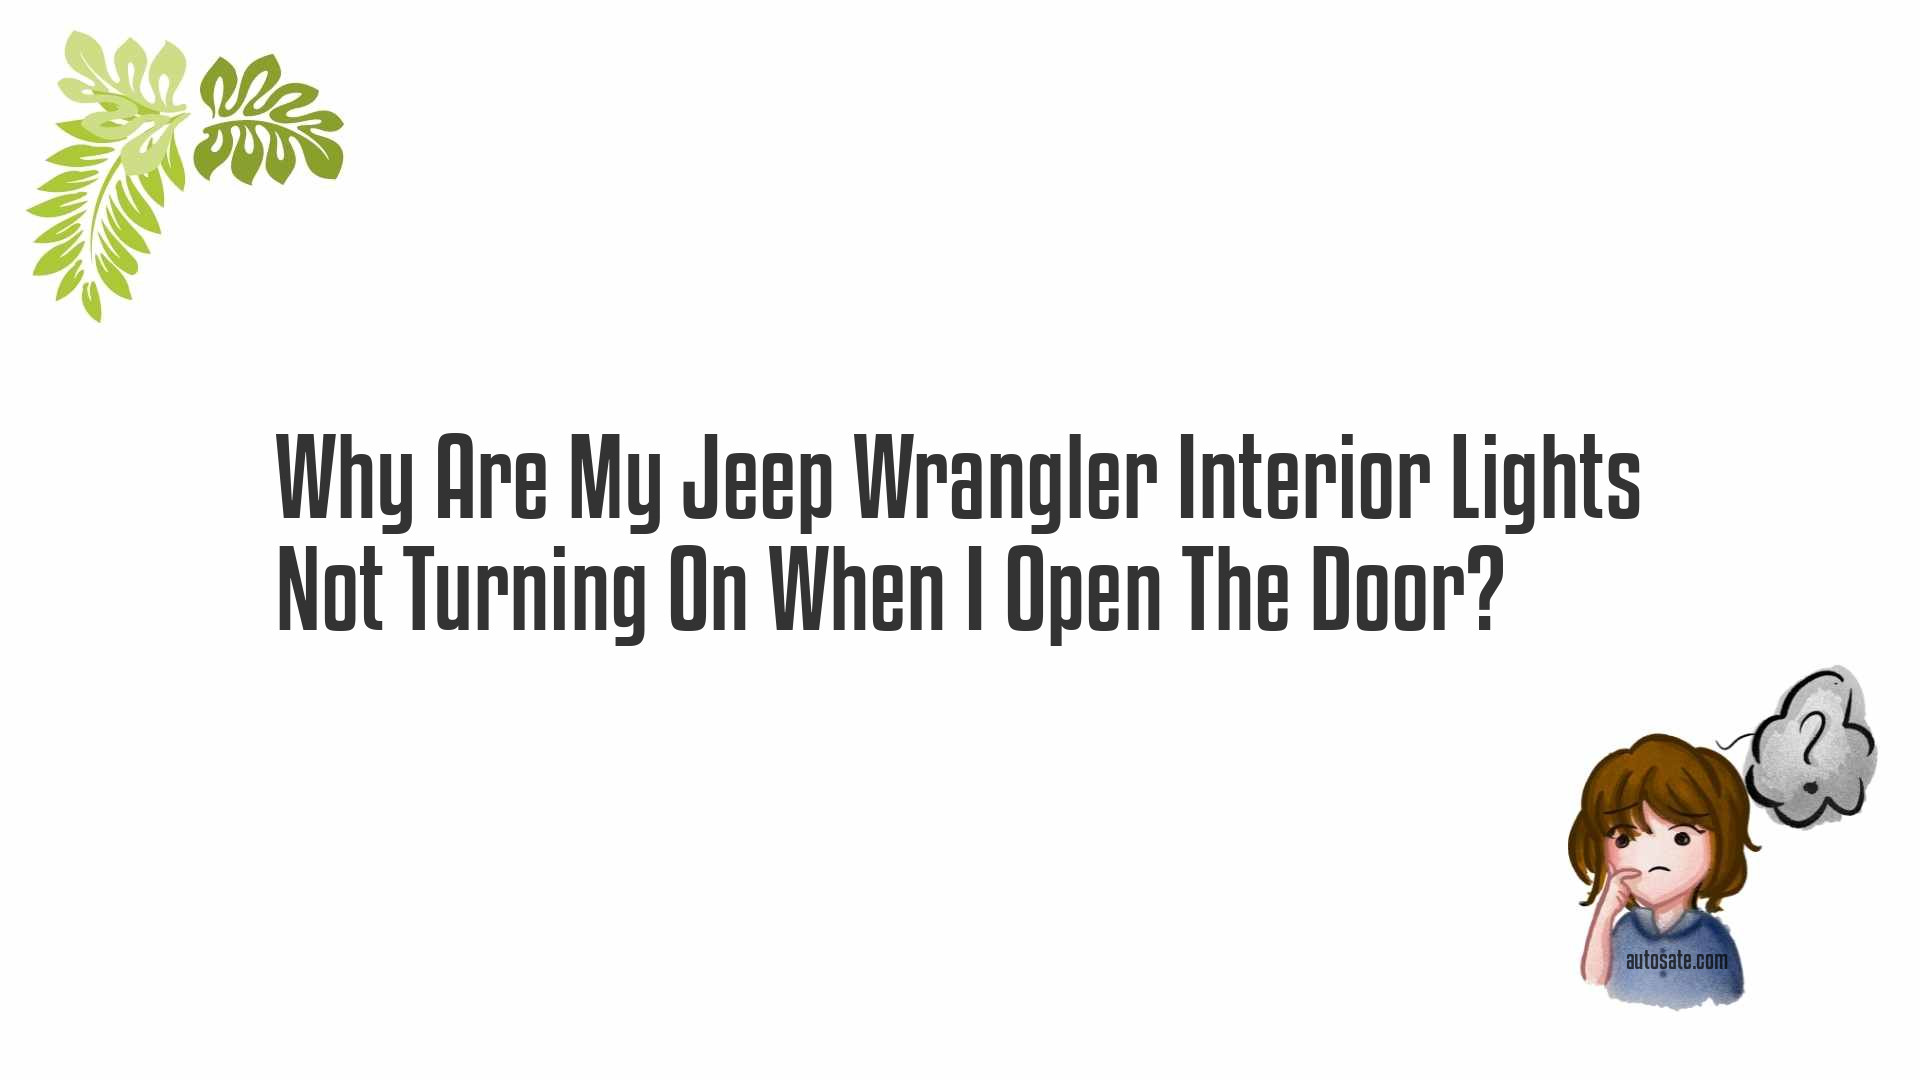 Why Are My Jeep Wrangler Interior Lights Not Turning On When I Open The Door?